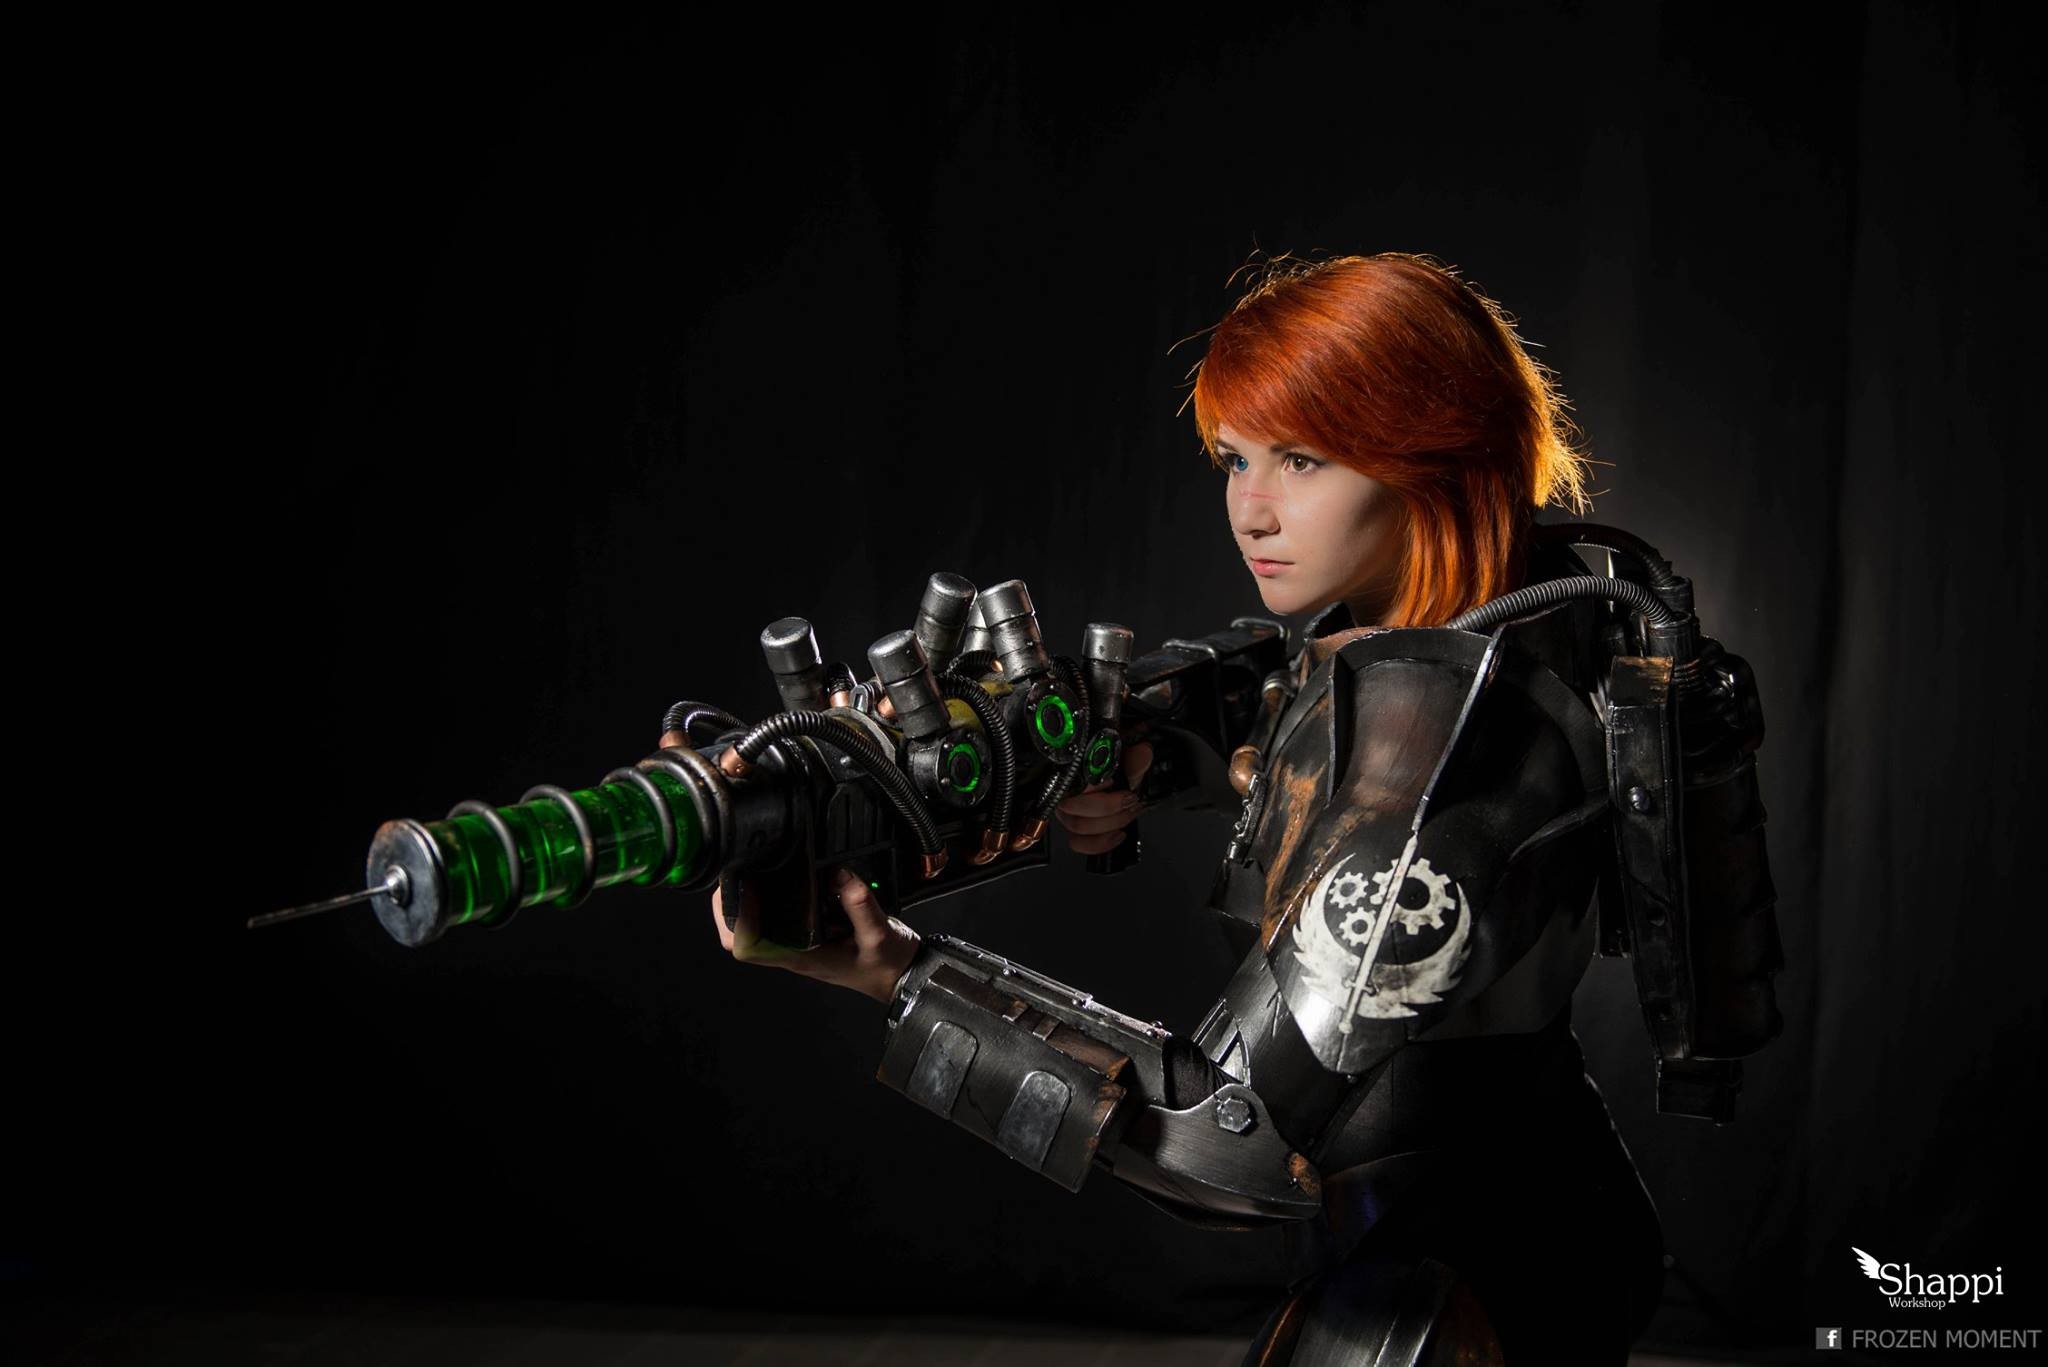 General 2048x1367 Fallout 4 cosplay power armor Fallout redhead women girls with guns watermarked video game girls video games PC gaming science fiction women futuristic DeviantArt futuristic armor